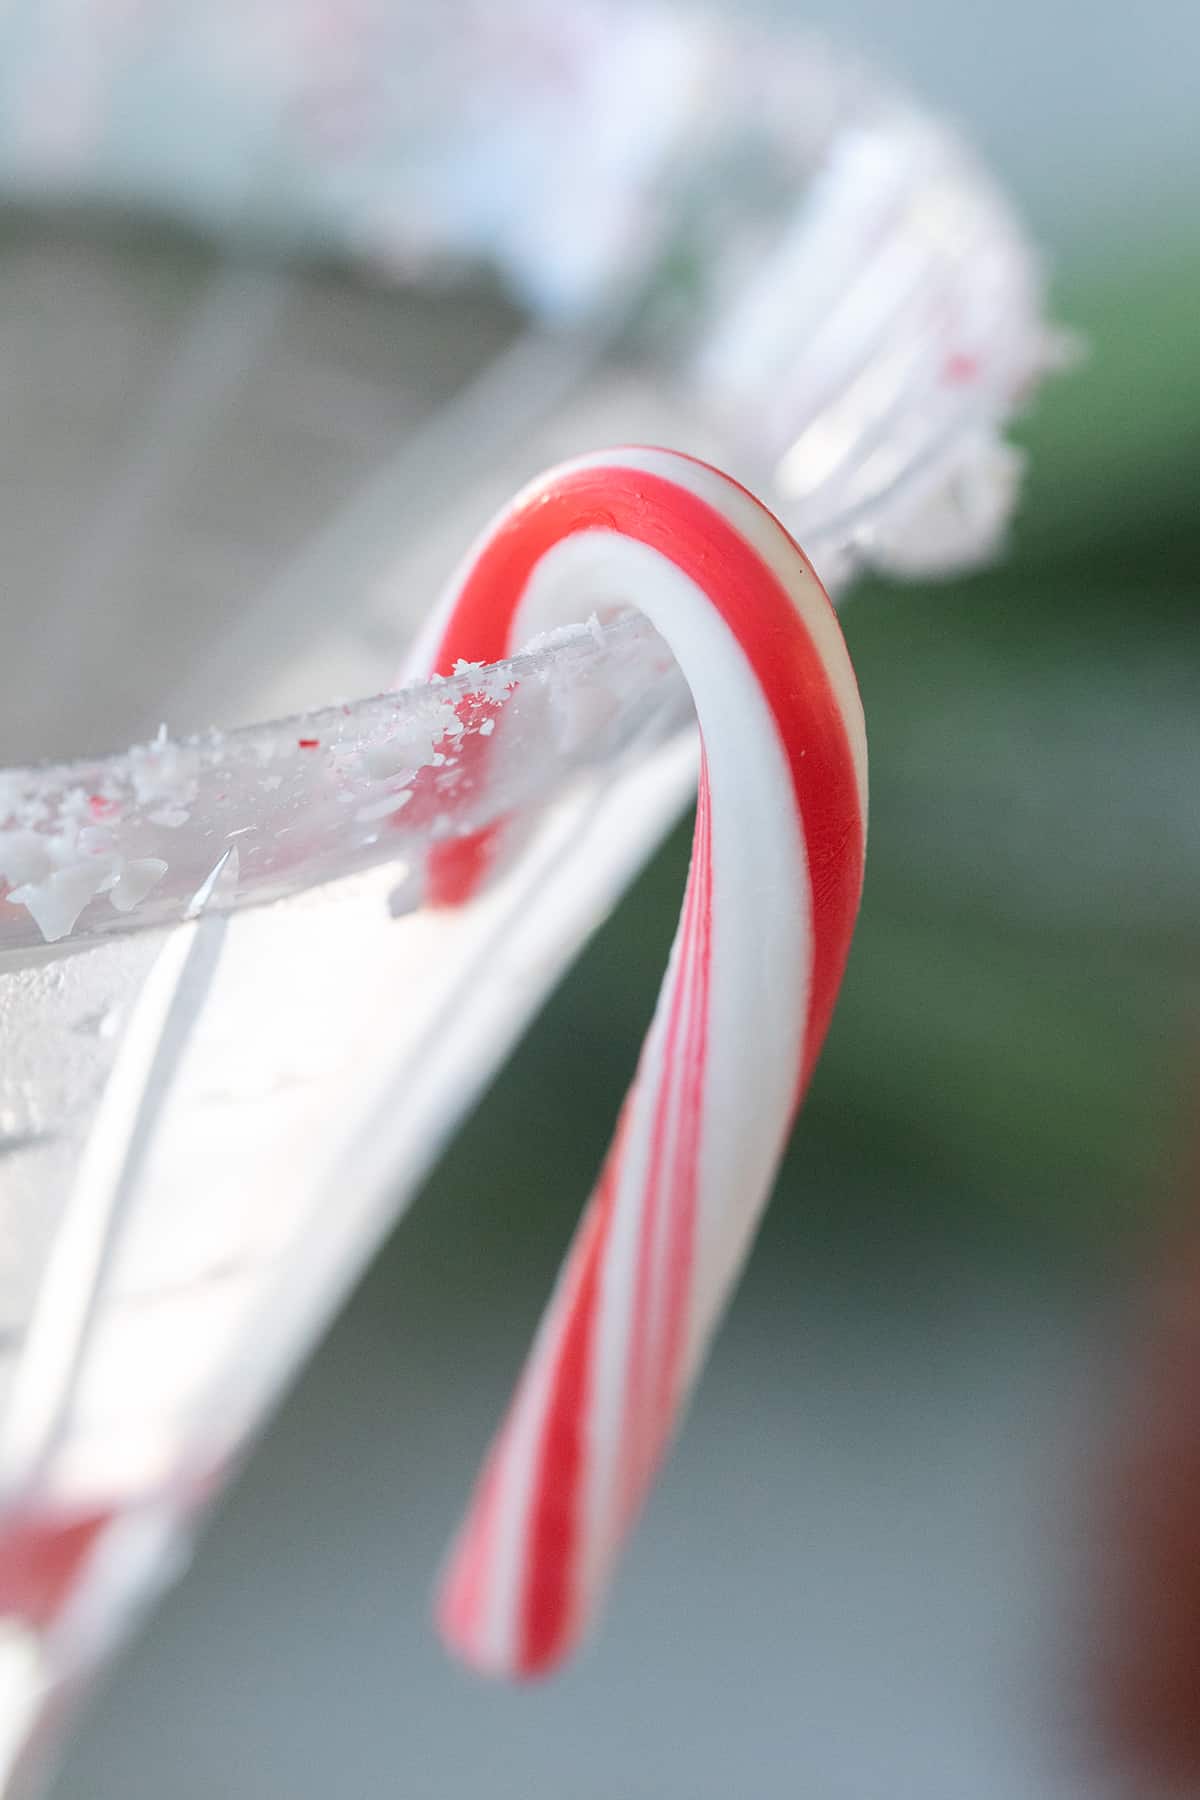 candy cane on a martini glass